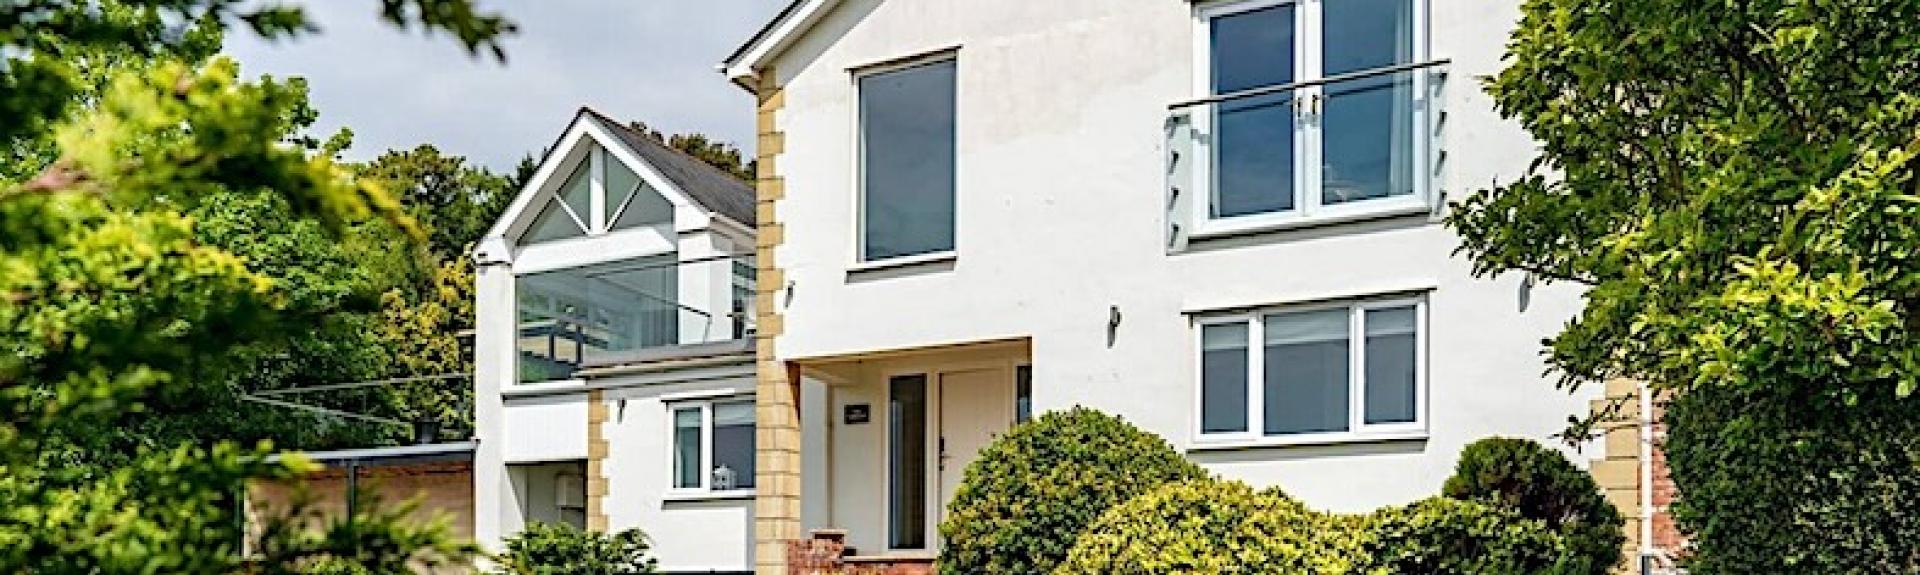 A large 2-storey Teignmouth holiday home overlooks a shrub-filled garden.